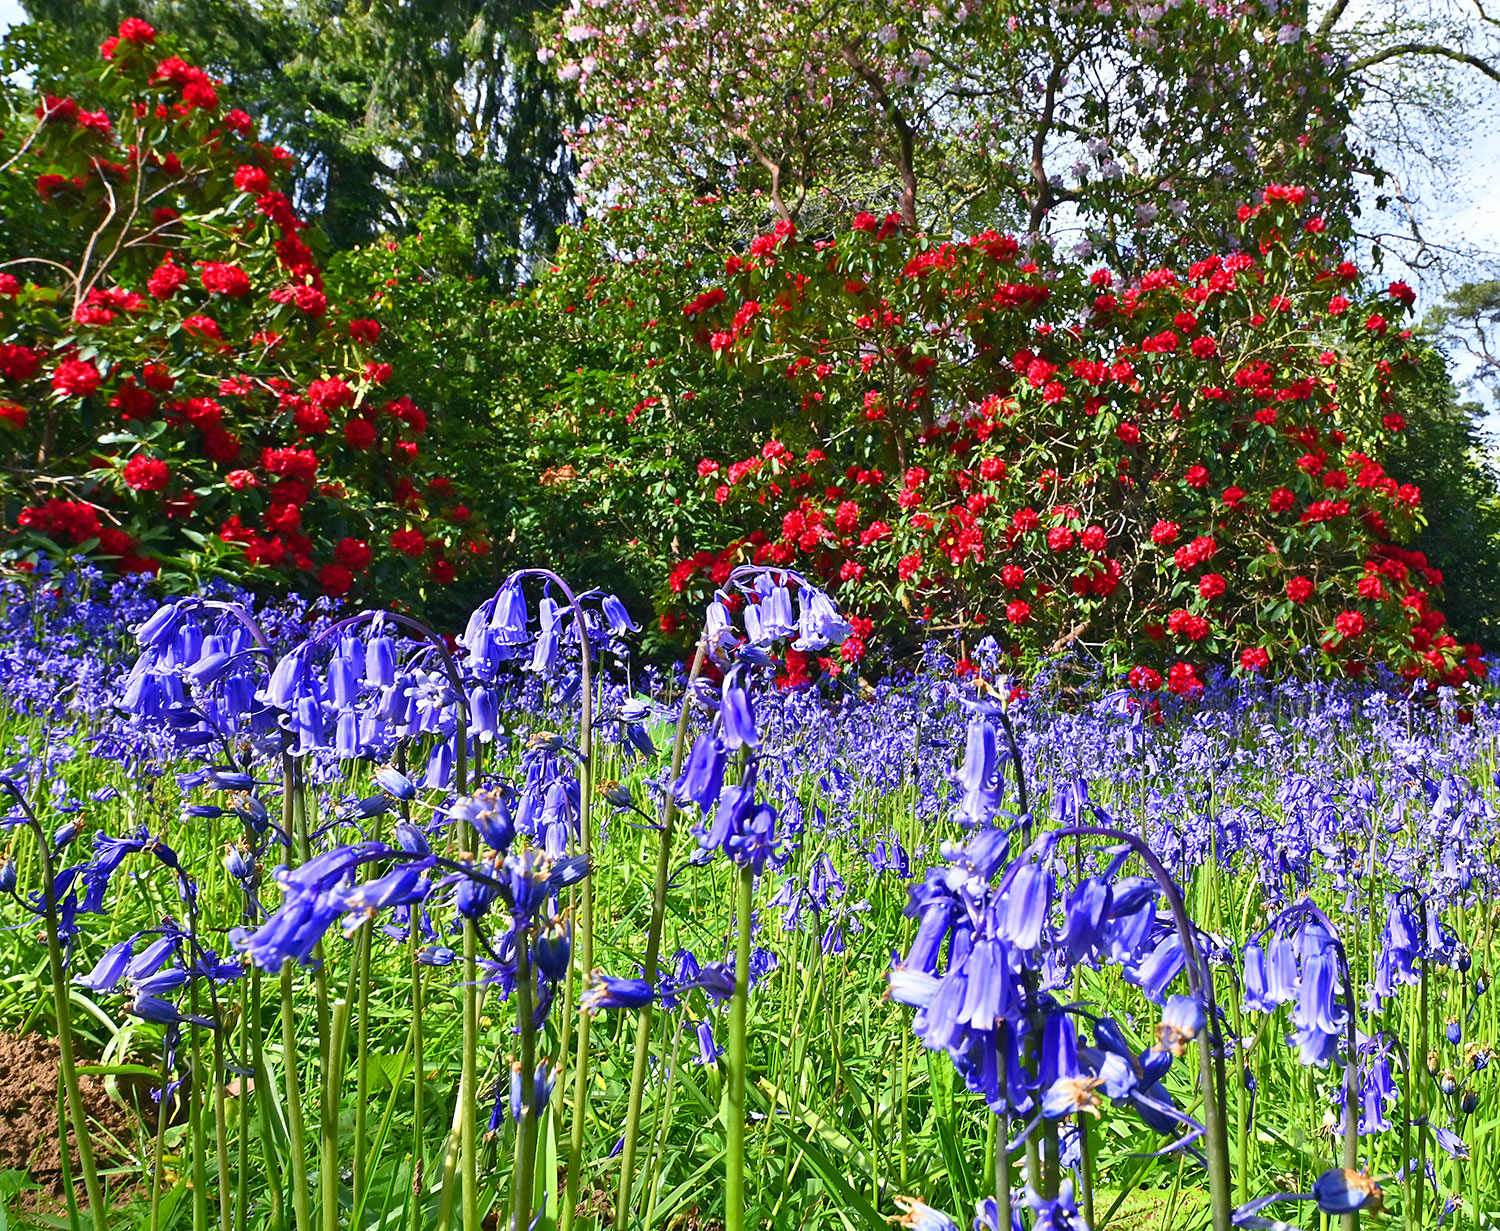 Picture of two red Rhododendron bushes behind a carpet of Bluebells